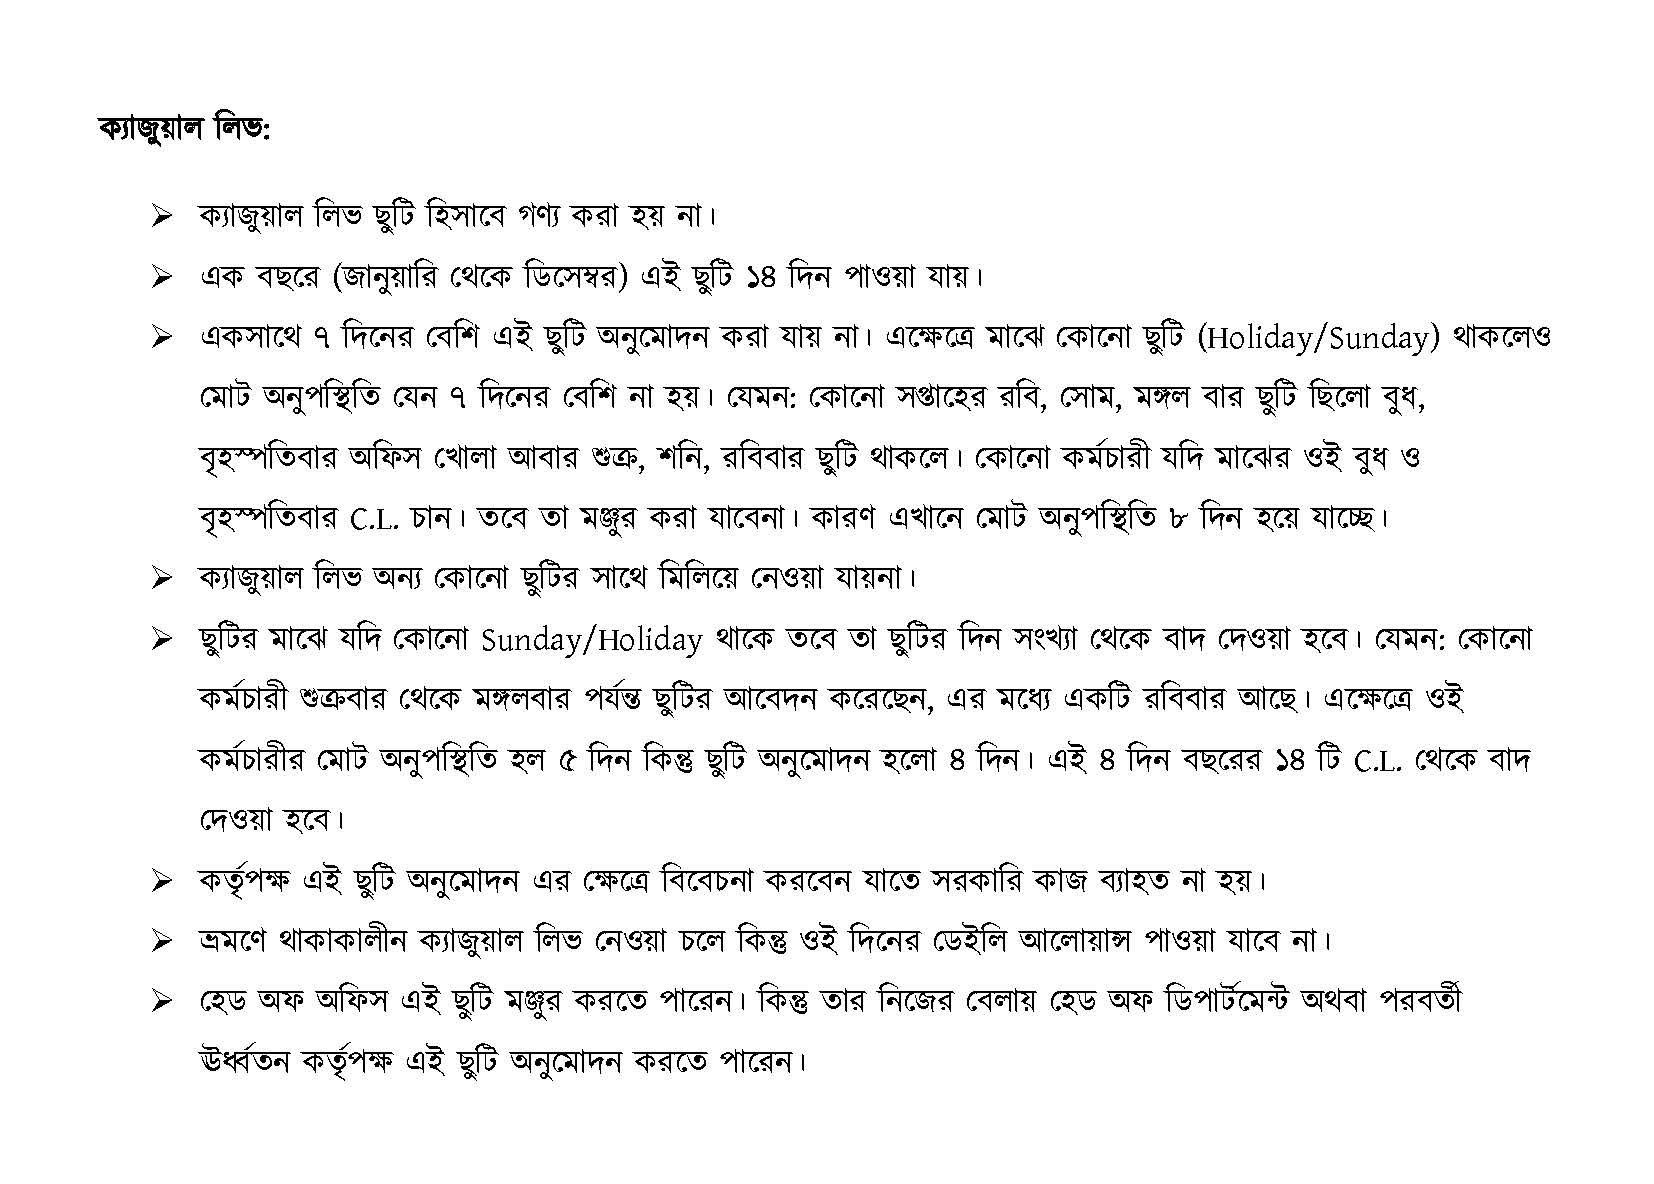 Bangla Meaning of Leave